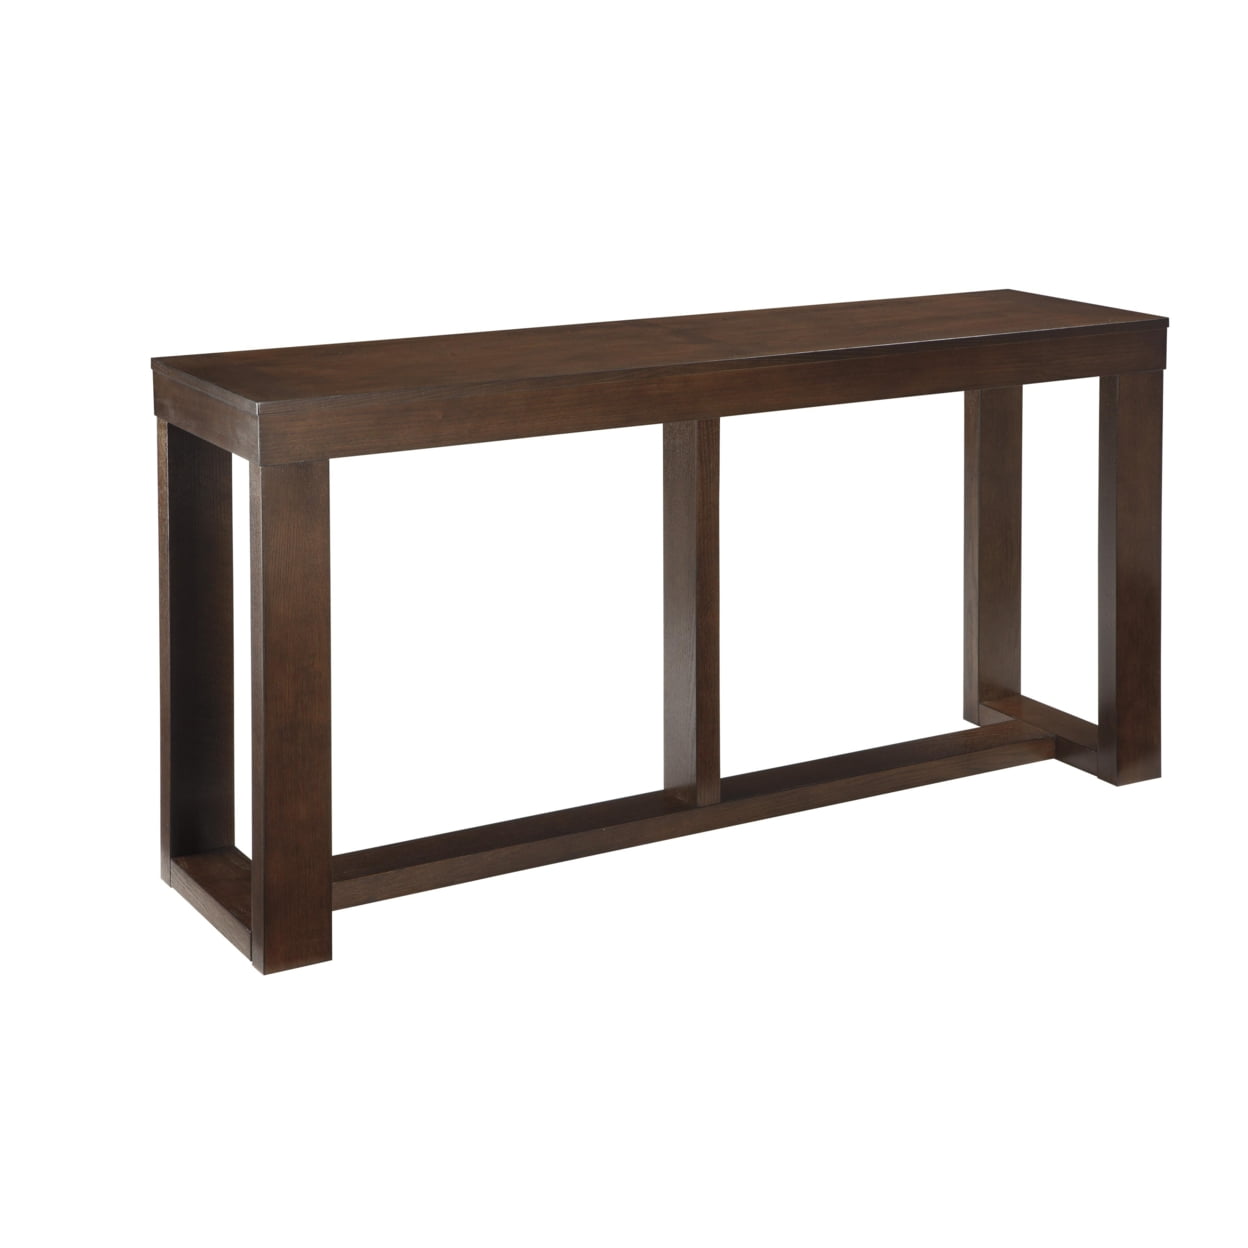 Picture of Benjara BM210852 Rectangular Wooden Sofa Table with Sled Base - Espresso Brown - 33.13 x 64 x 16.25 in.